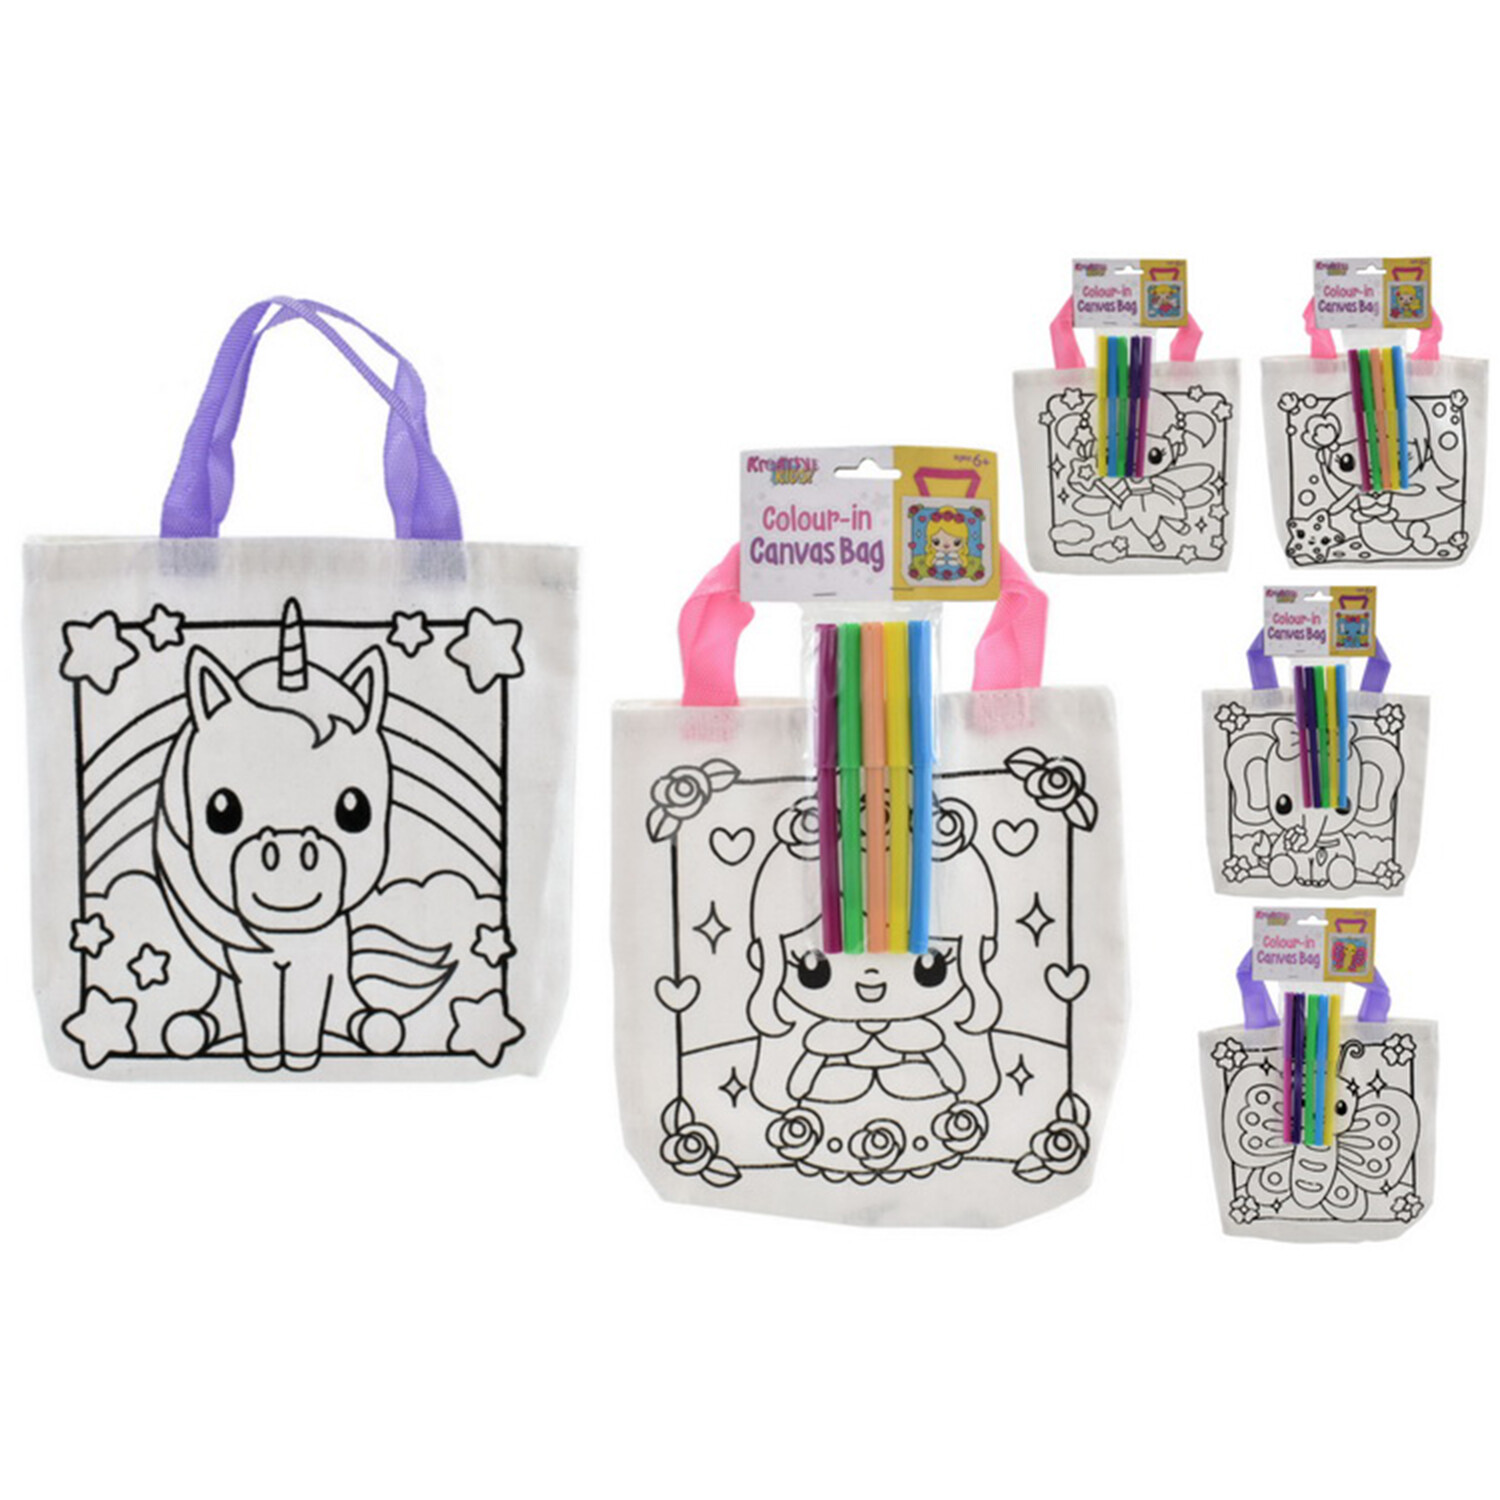 Single Kreative Kids Colour Your Own Canvas Bag Kit in Assorted styles Image 1